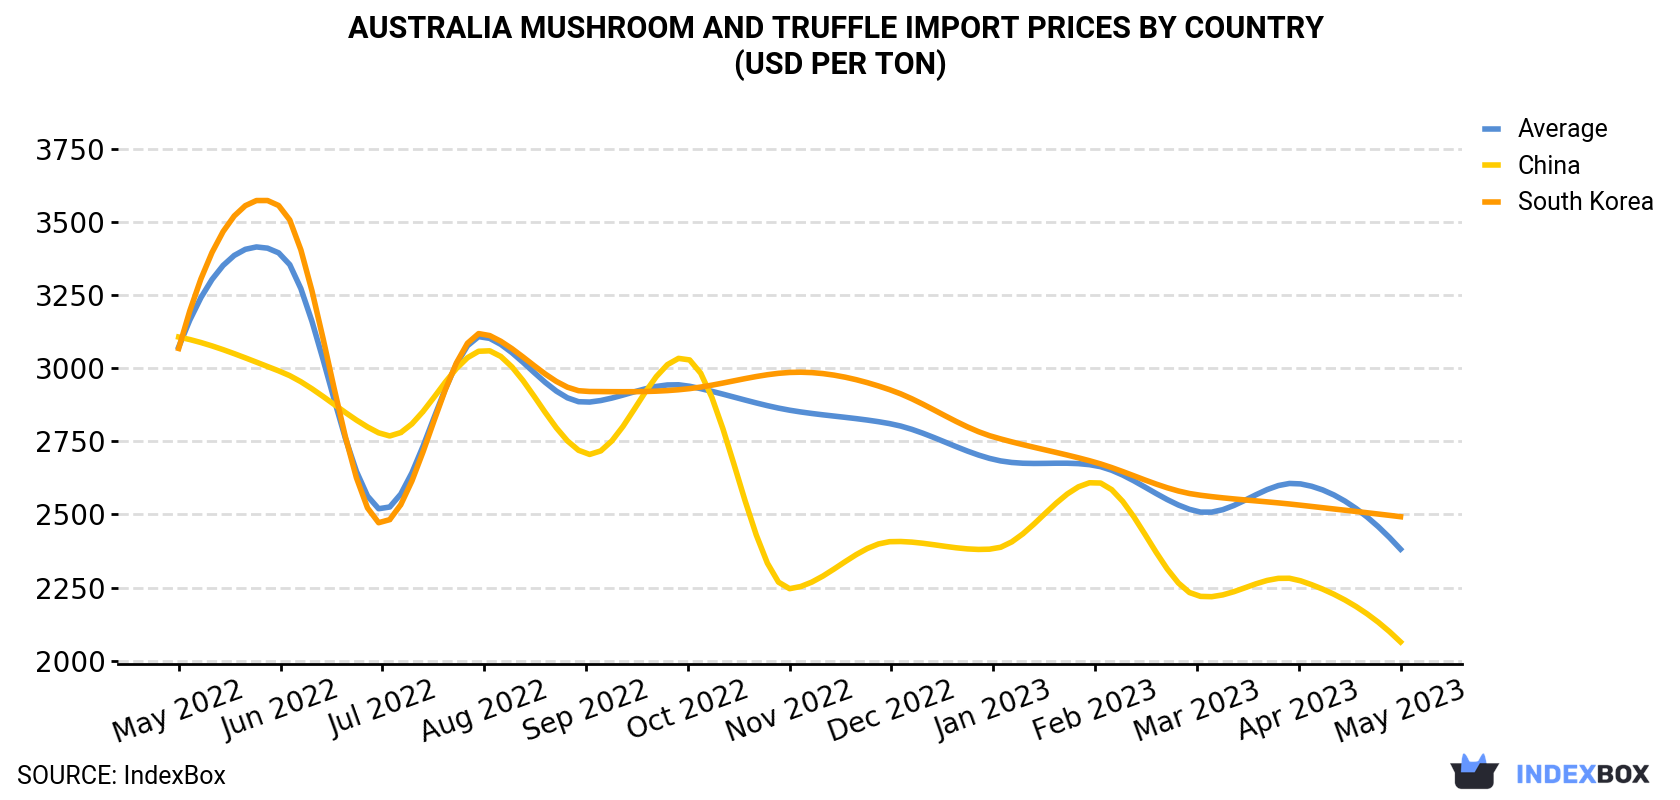 Australia Mushroom And Truffle Import Prices By Country (USD Per Ton)